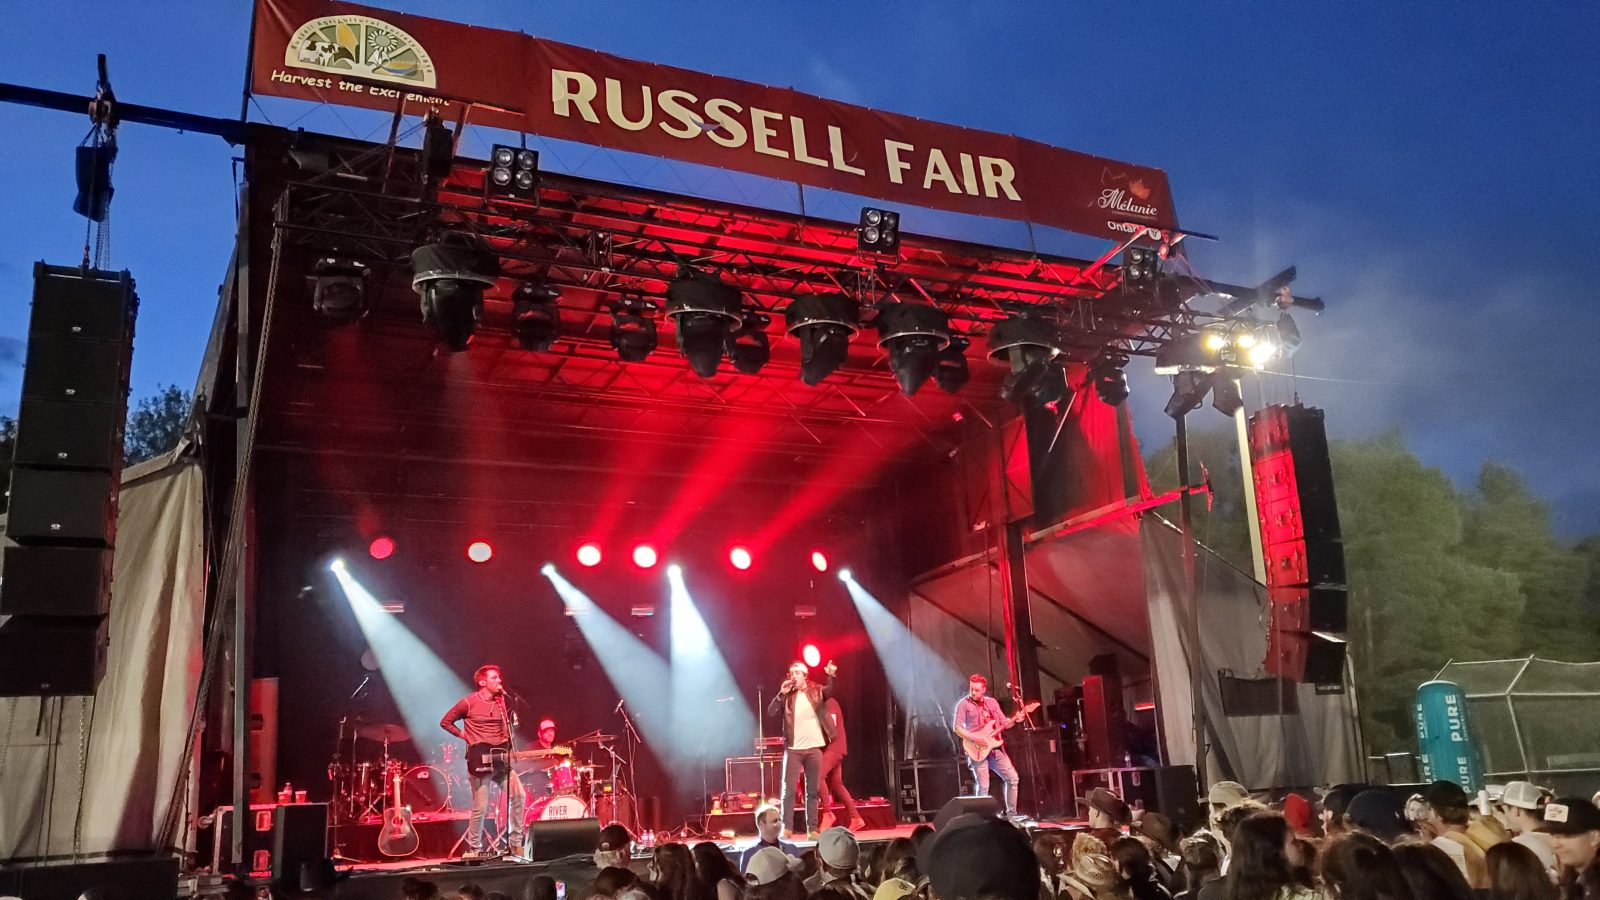 A rocking musical night at the Russell Fair